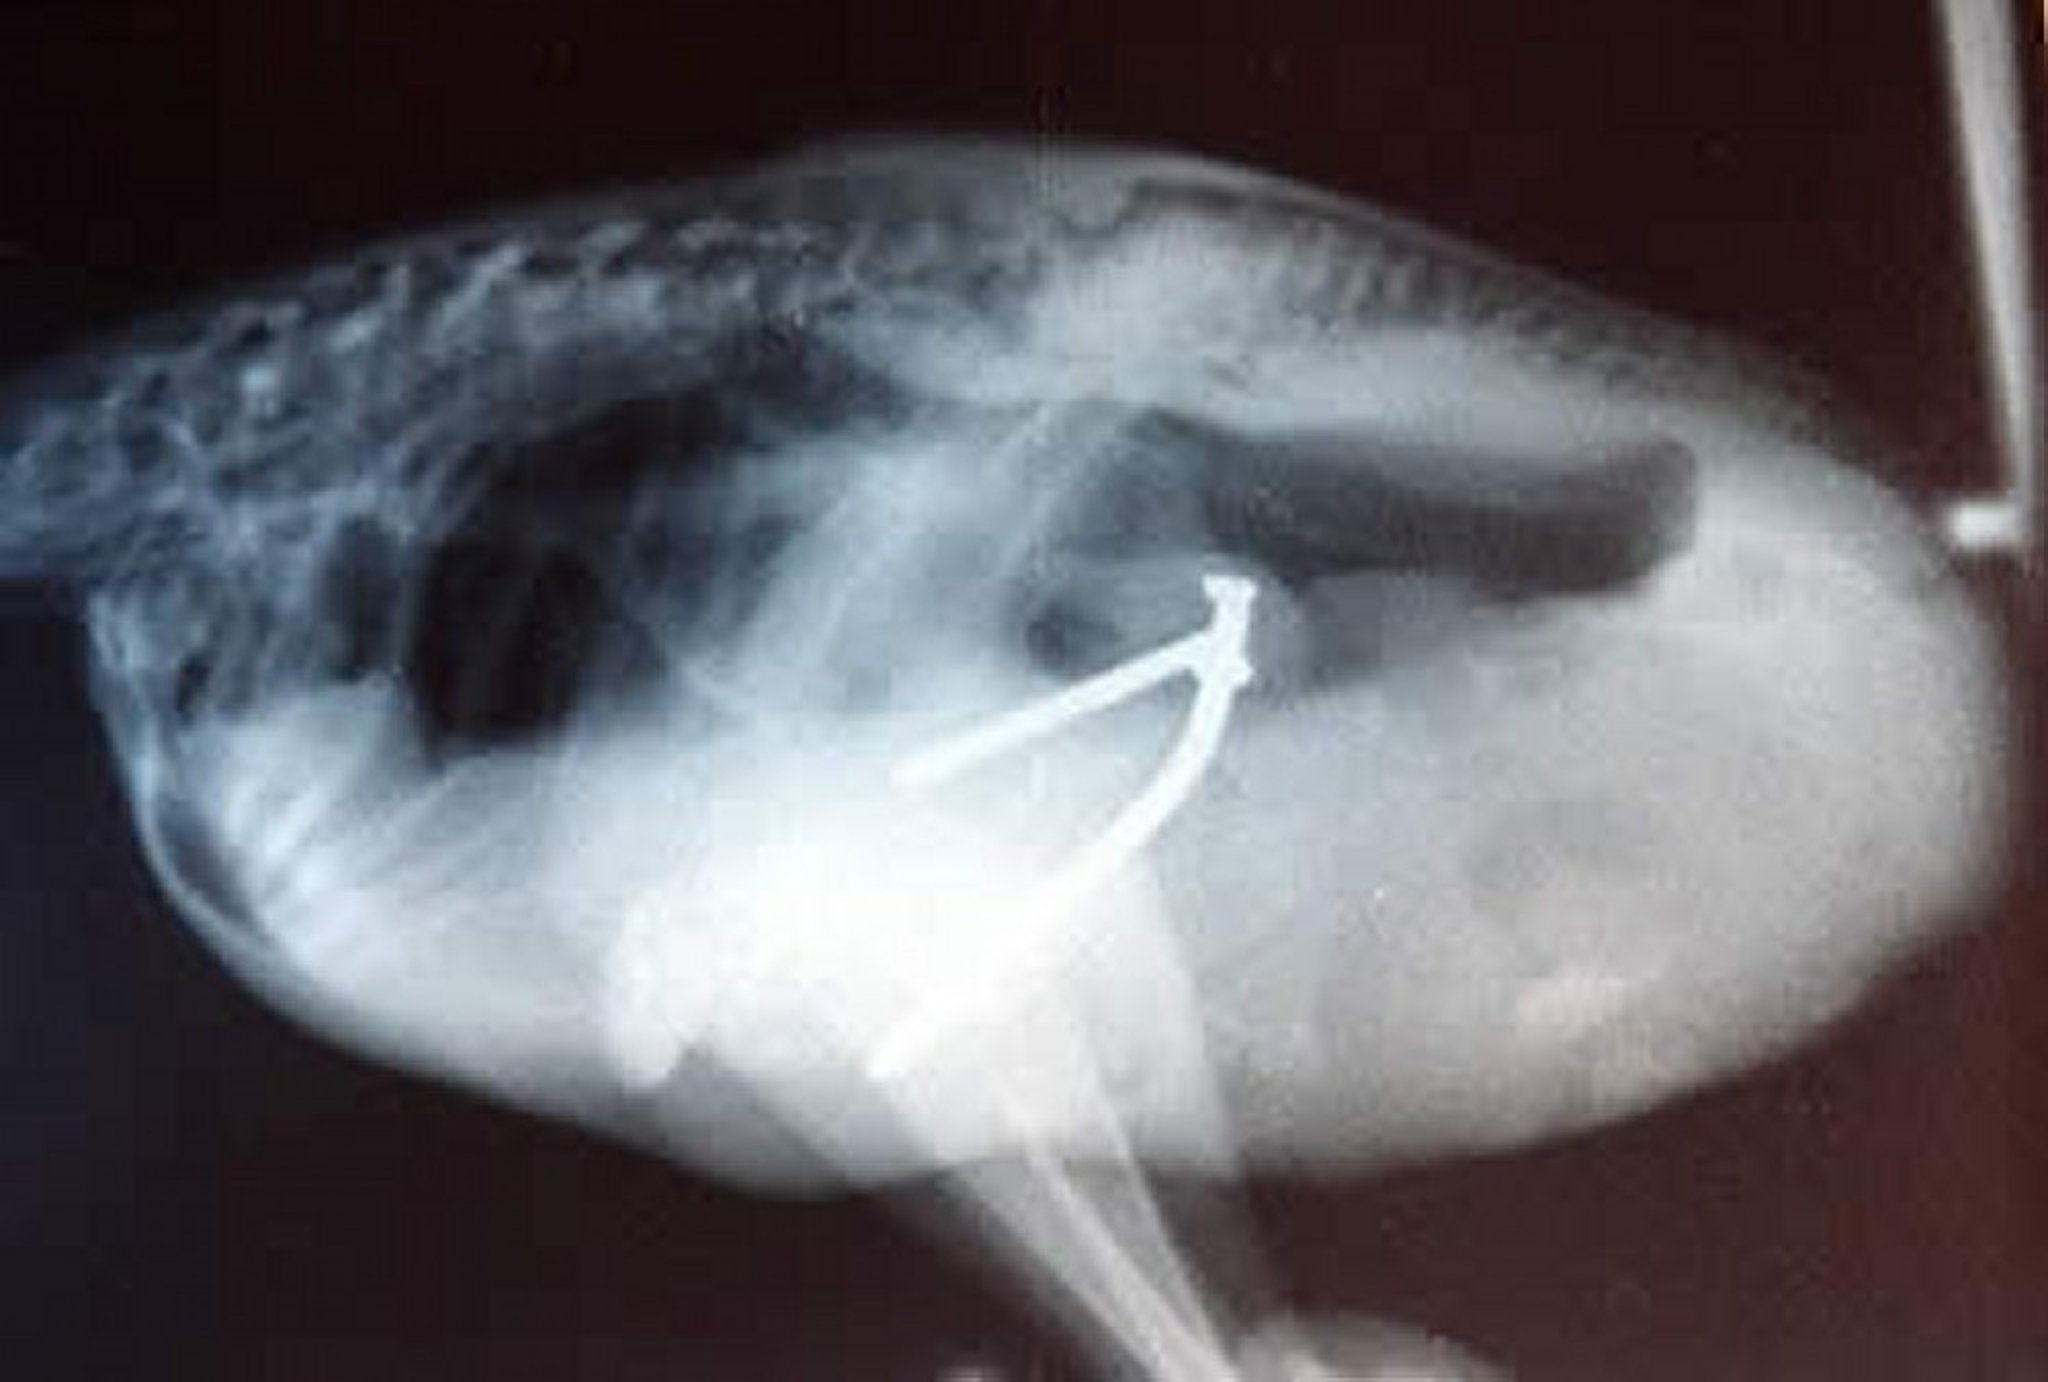 Metallic foreign bodies, radiograph, ostrich chick